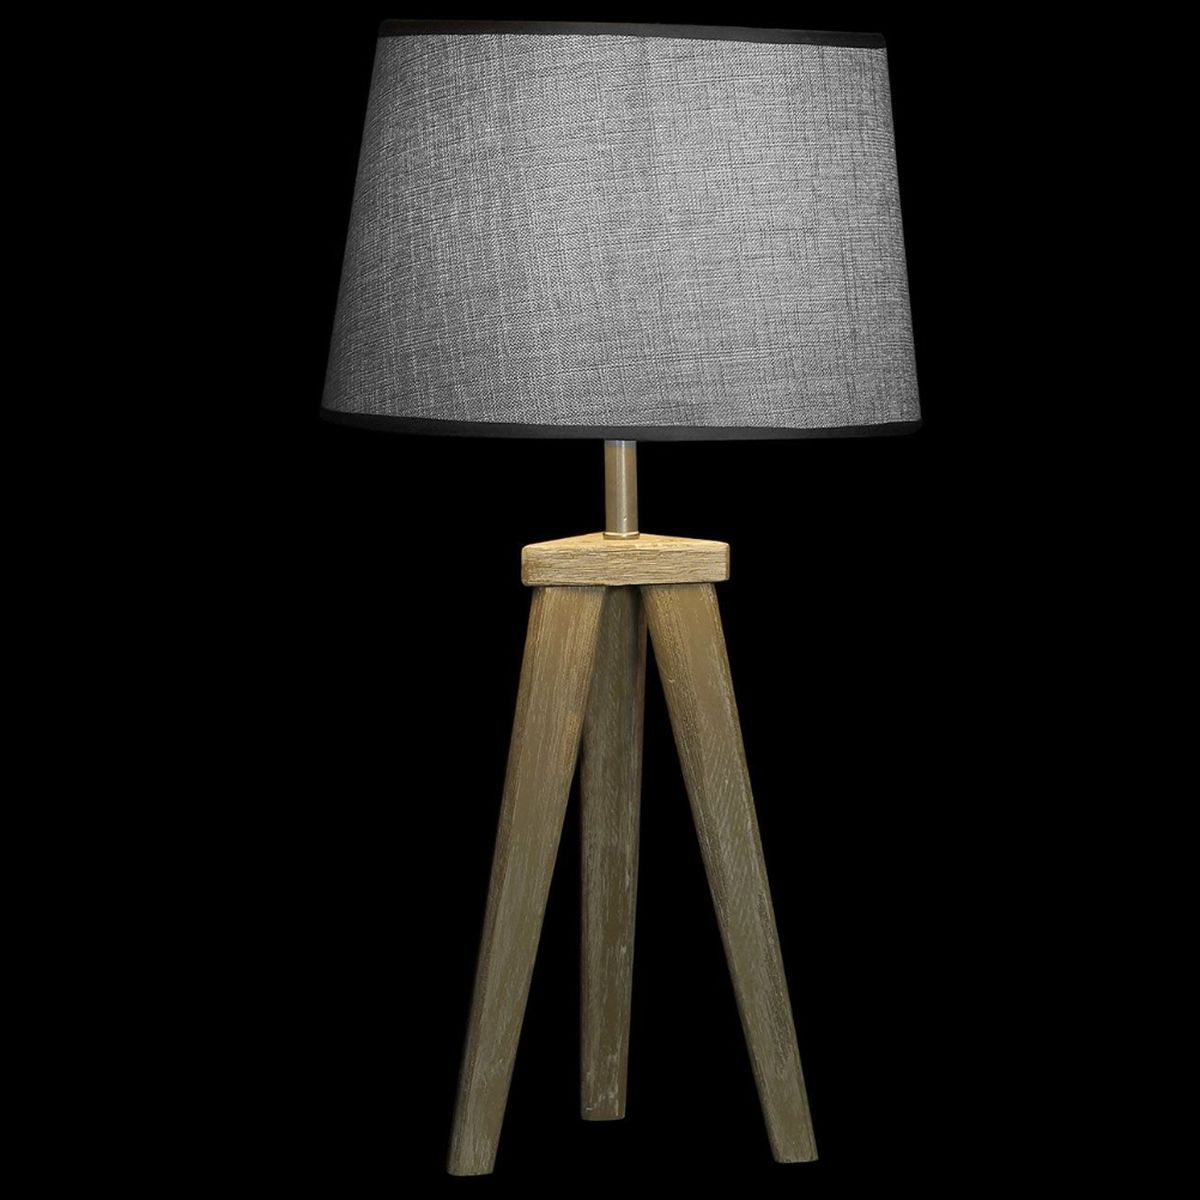 Patinated wooden lamp with grey linen shade